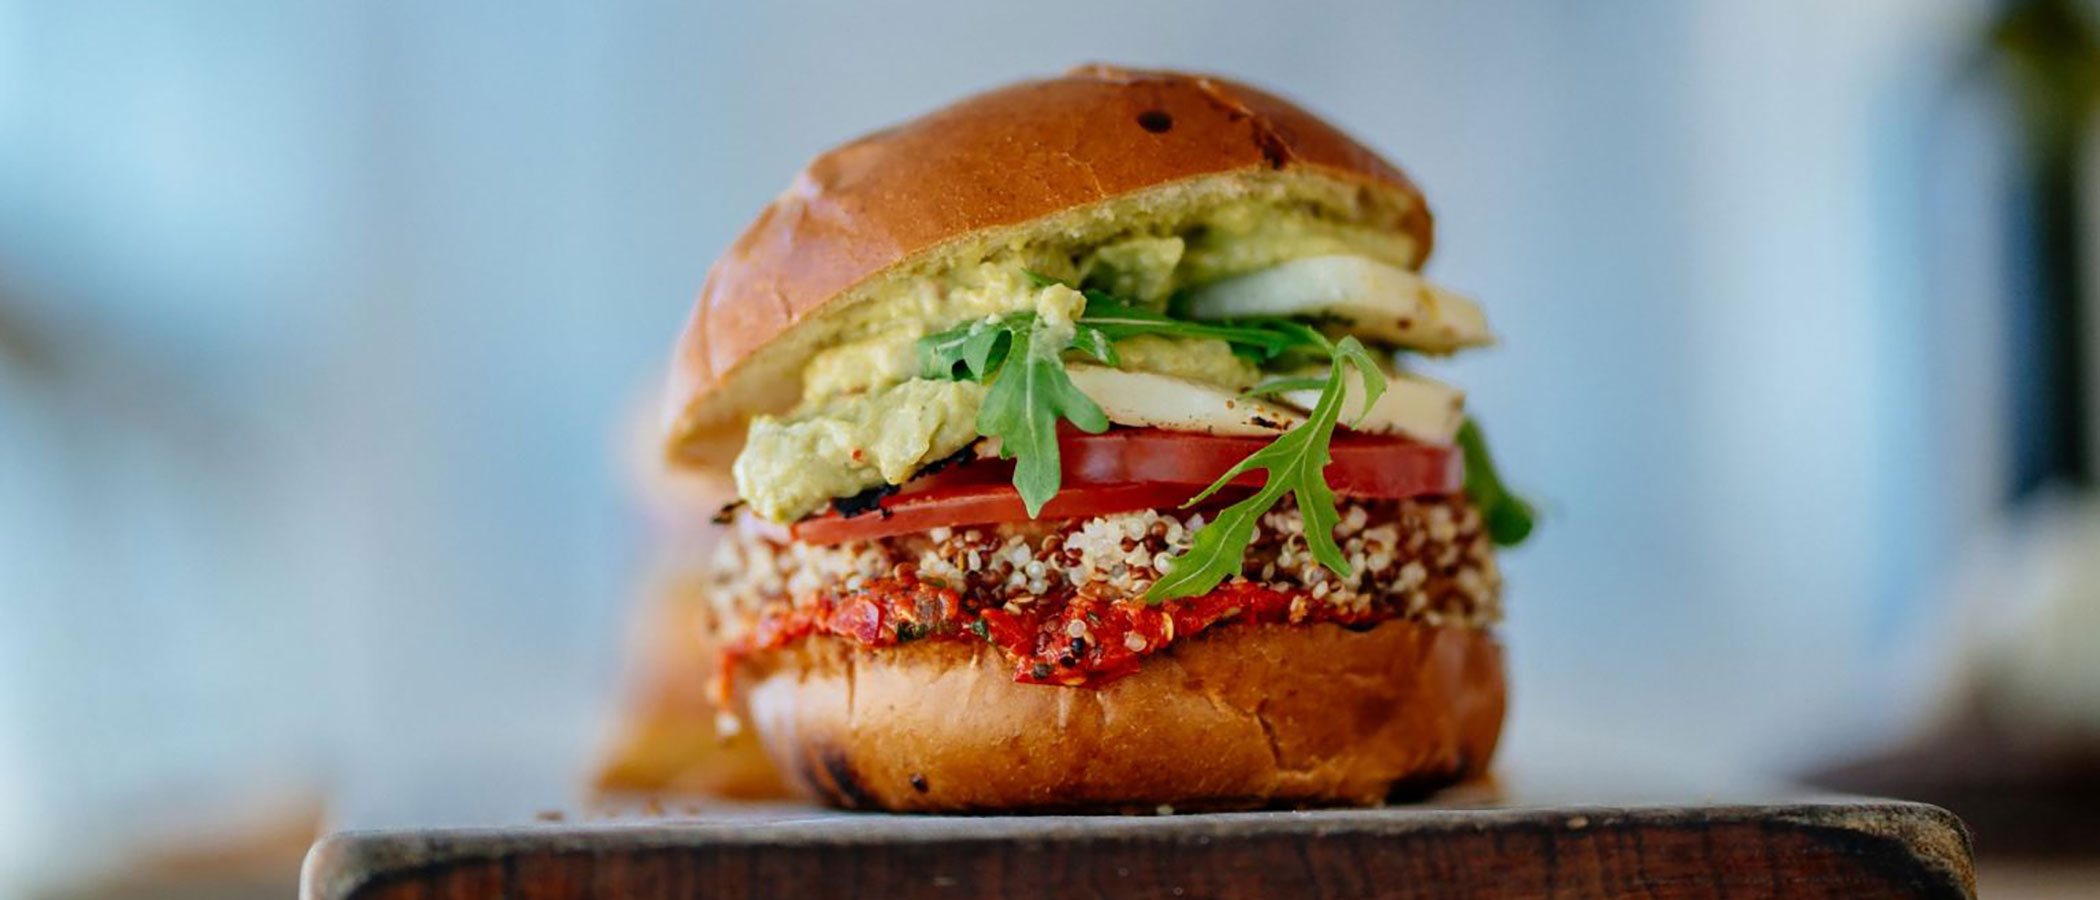 Burger made with quinoa and vegetables